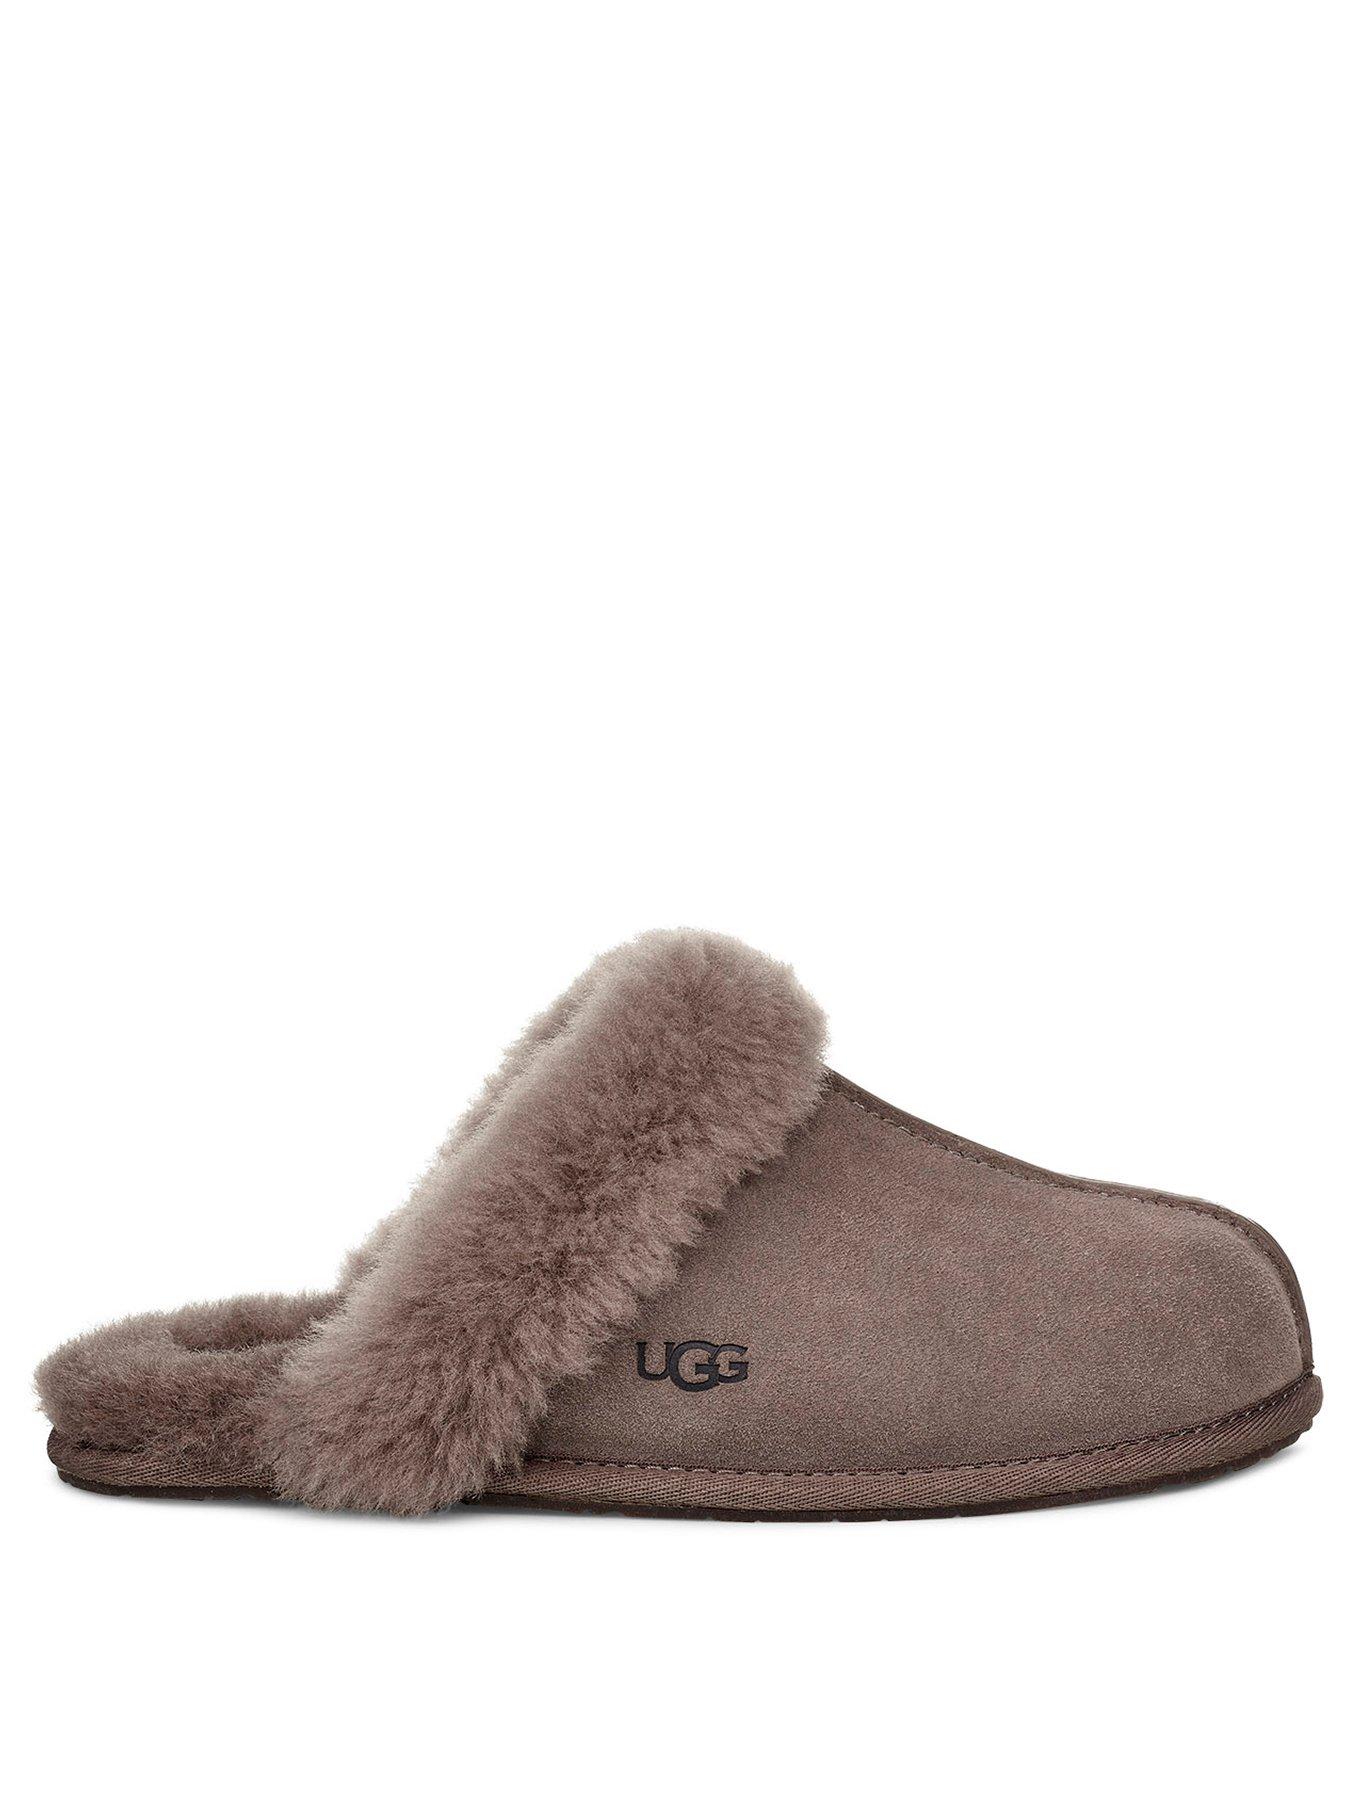 UGG Scuffette Slippers - Brown 